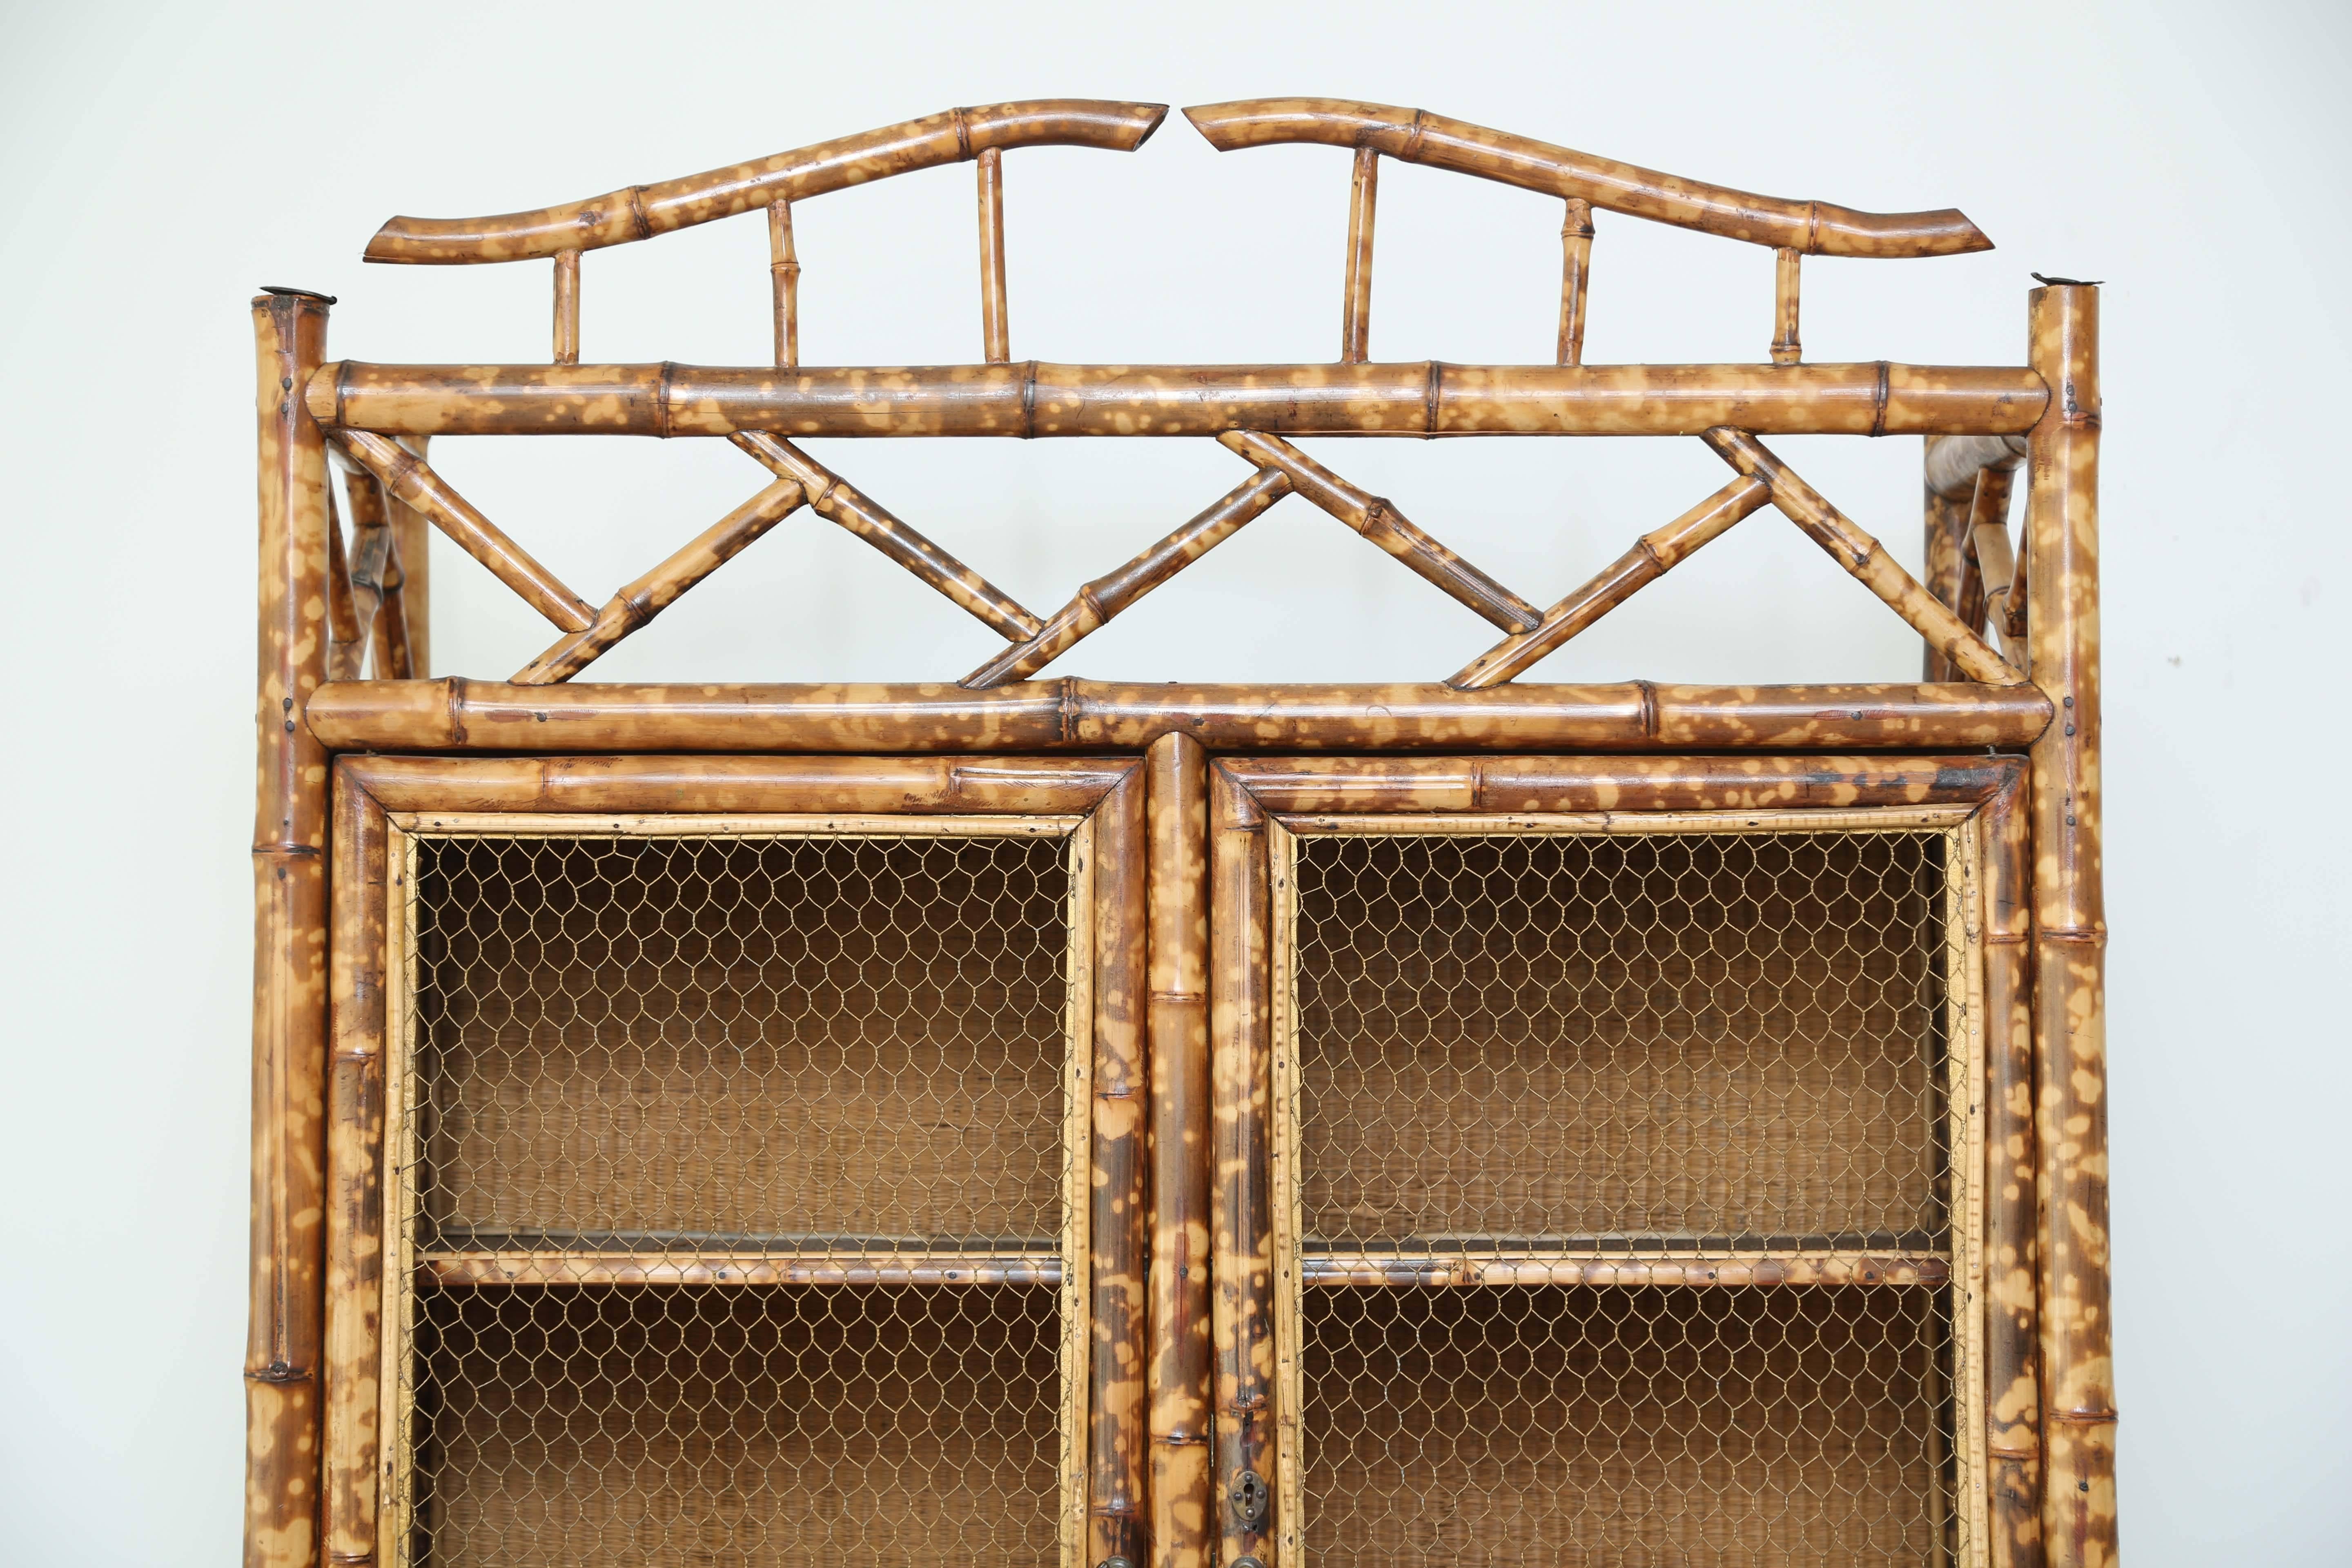 Lovely tortoise bamboo four-door cabinet. The top portion consists of two chicken wire doors with three shelves inside. The lower portion also consists of two chicken wire doors and three interior shelves.